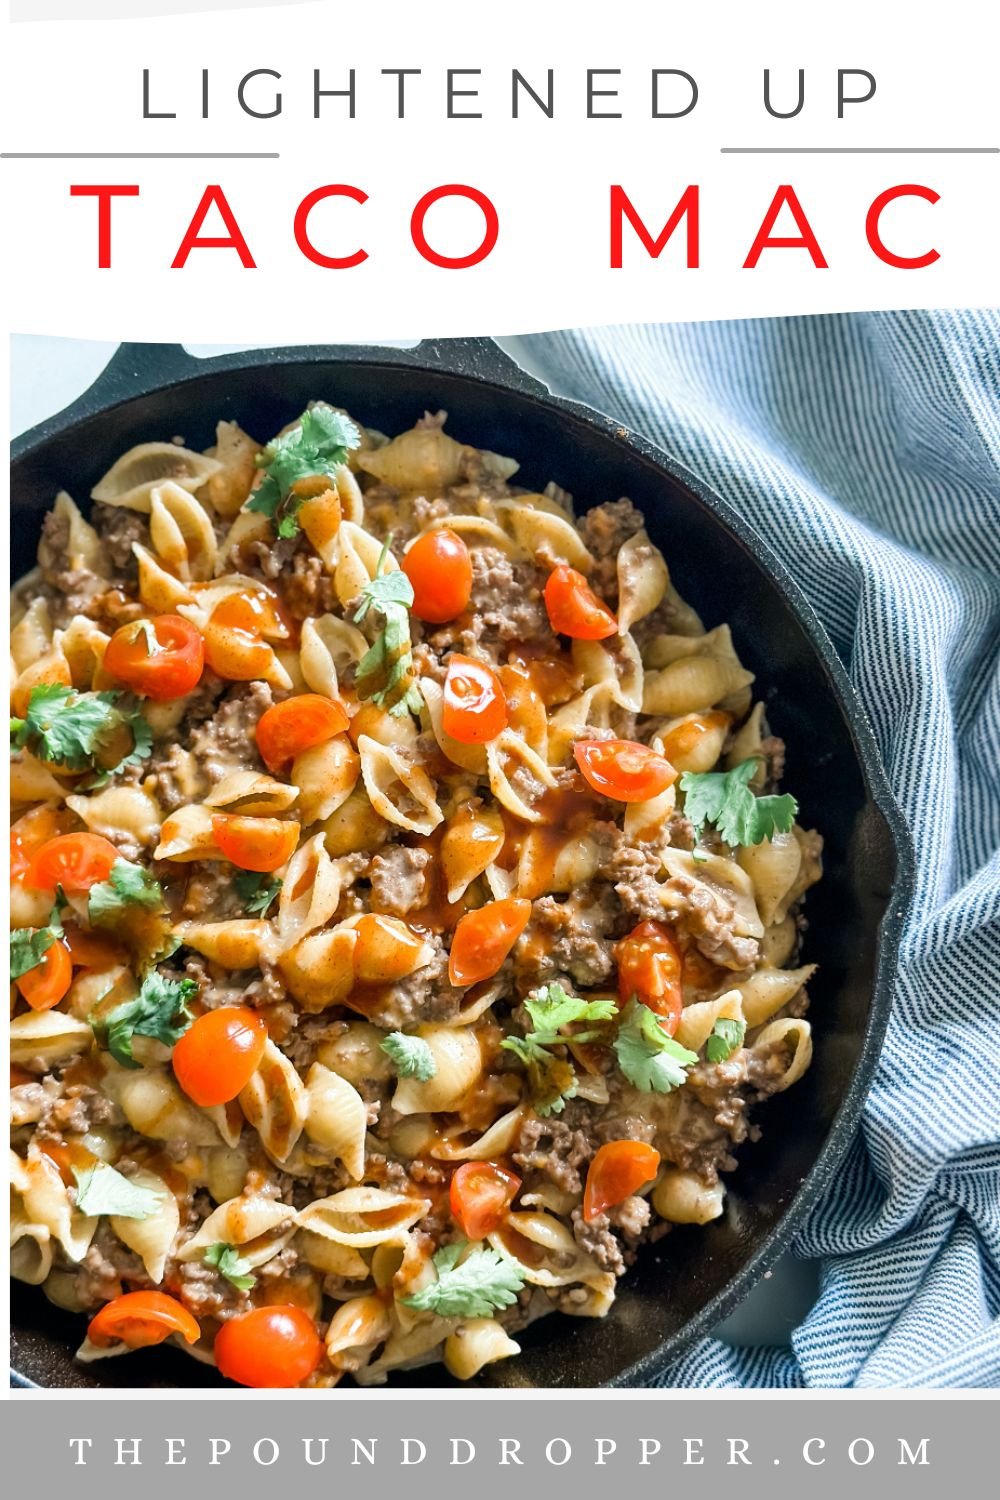 This Lightened Up Taco Mac is to die for! A classic comfort food meets taco night! I'm pretty confident this will be your weekly meal plan! via @pounddropper